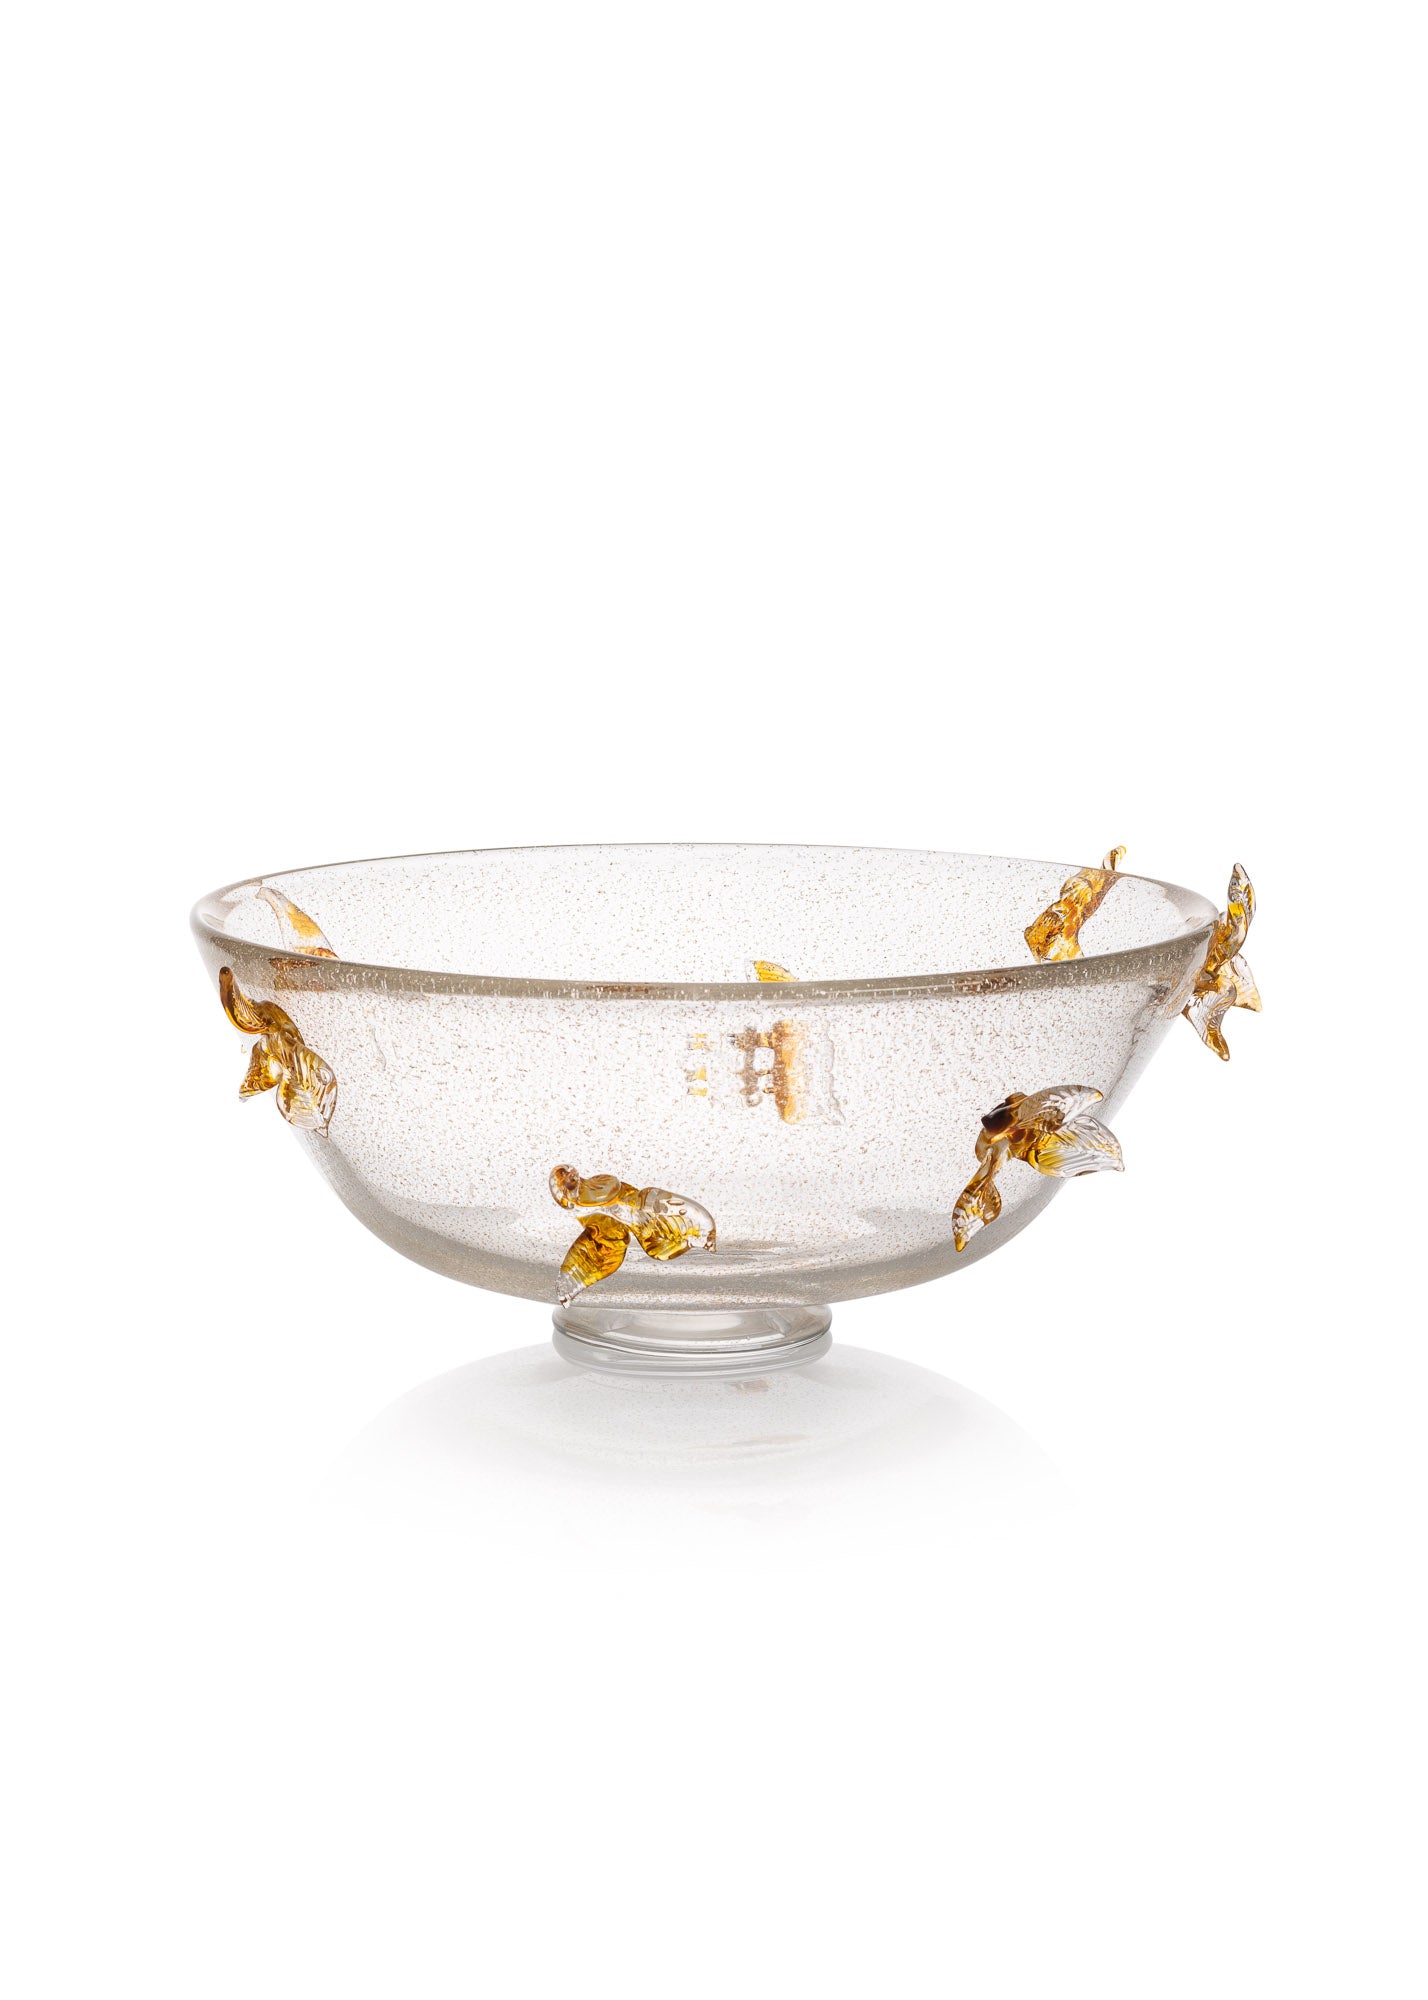 Bowl with gold leaves